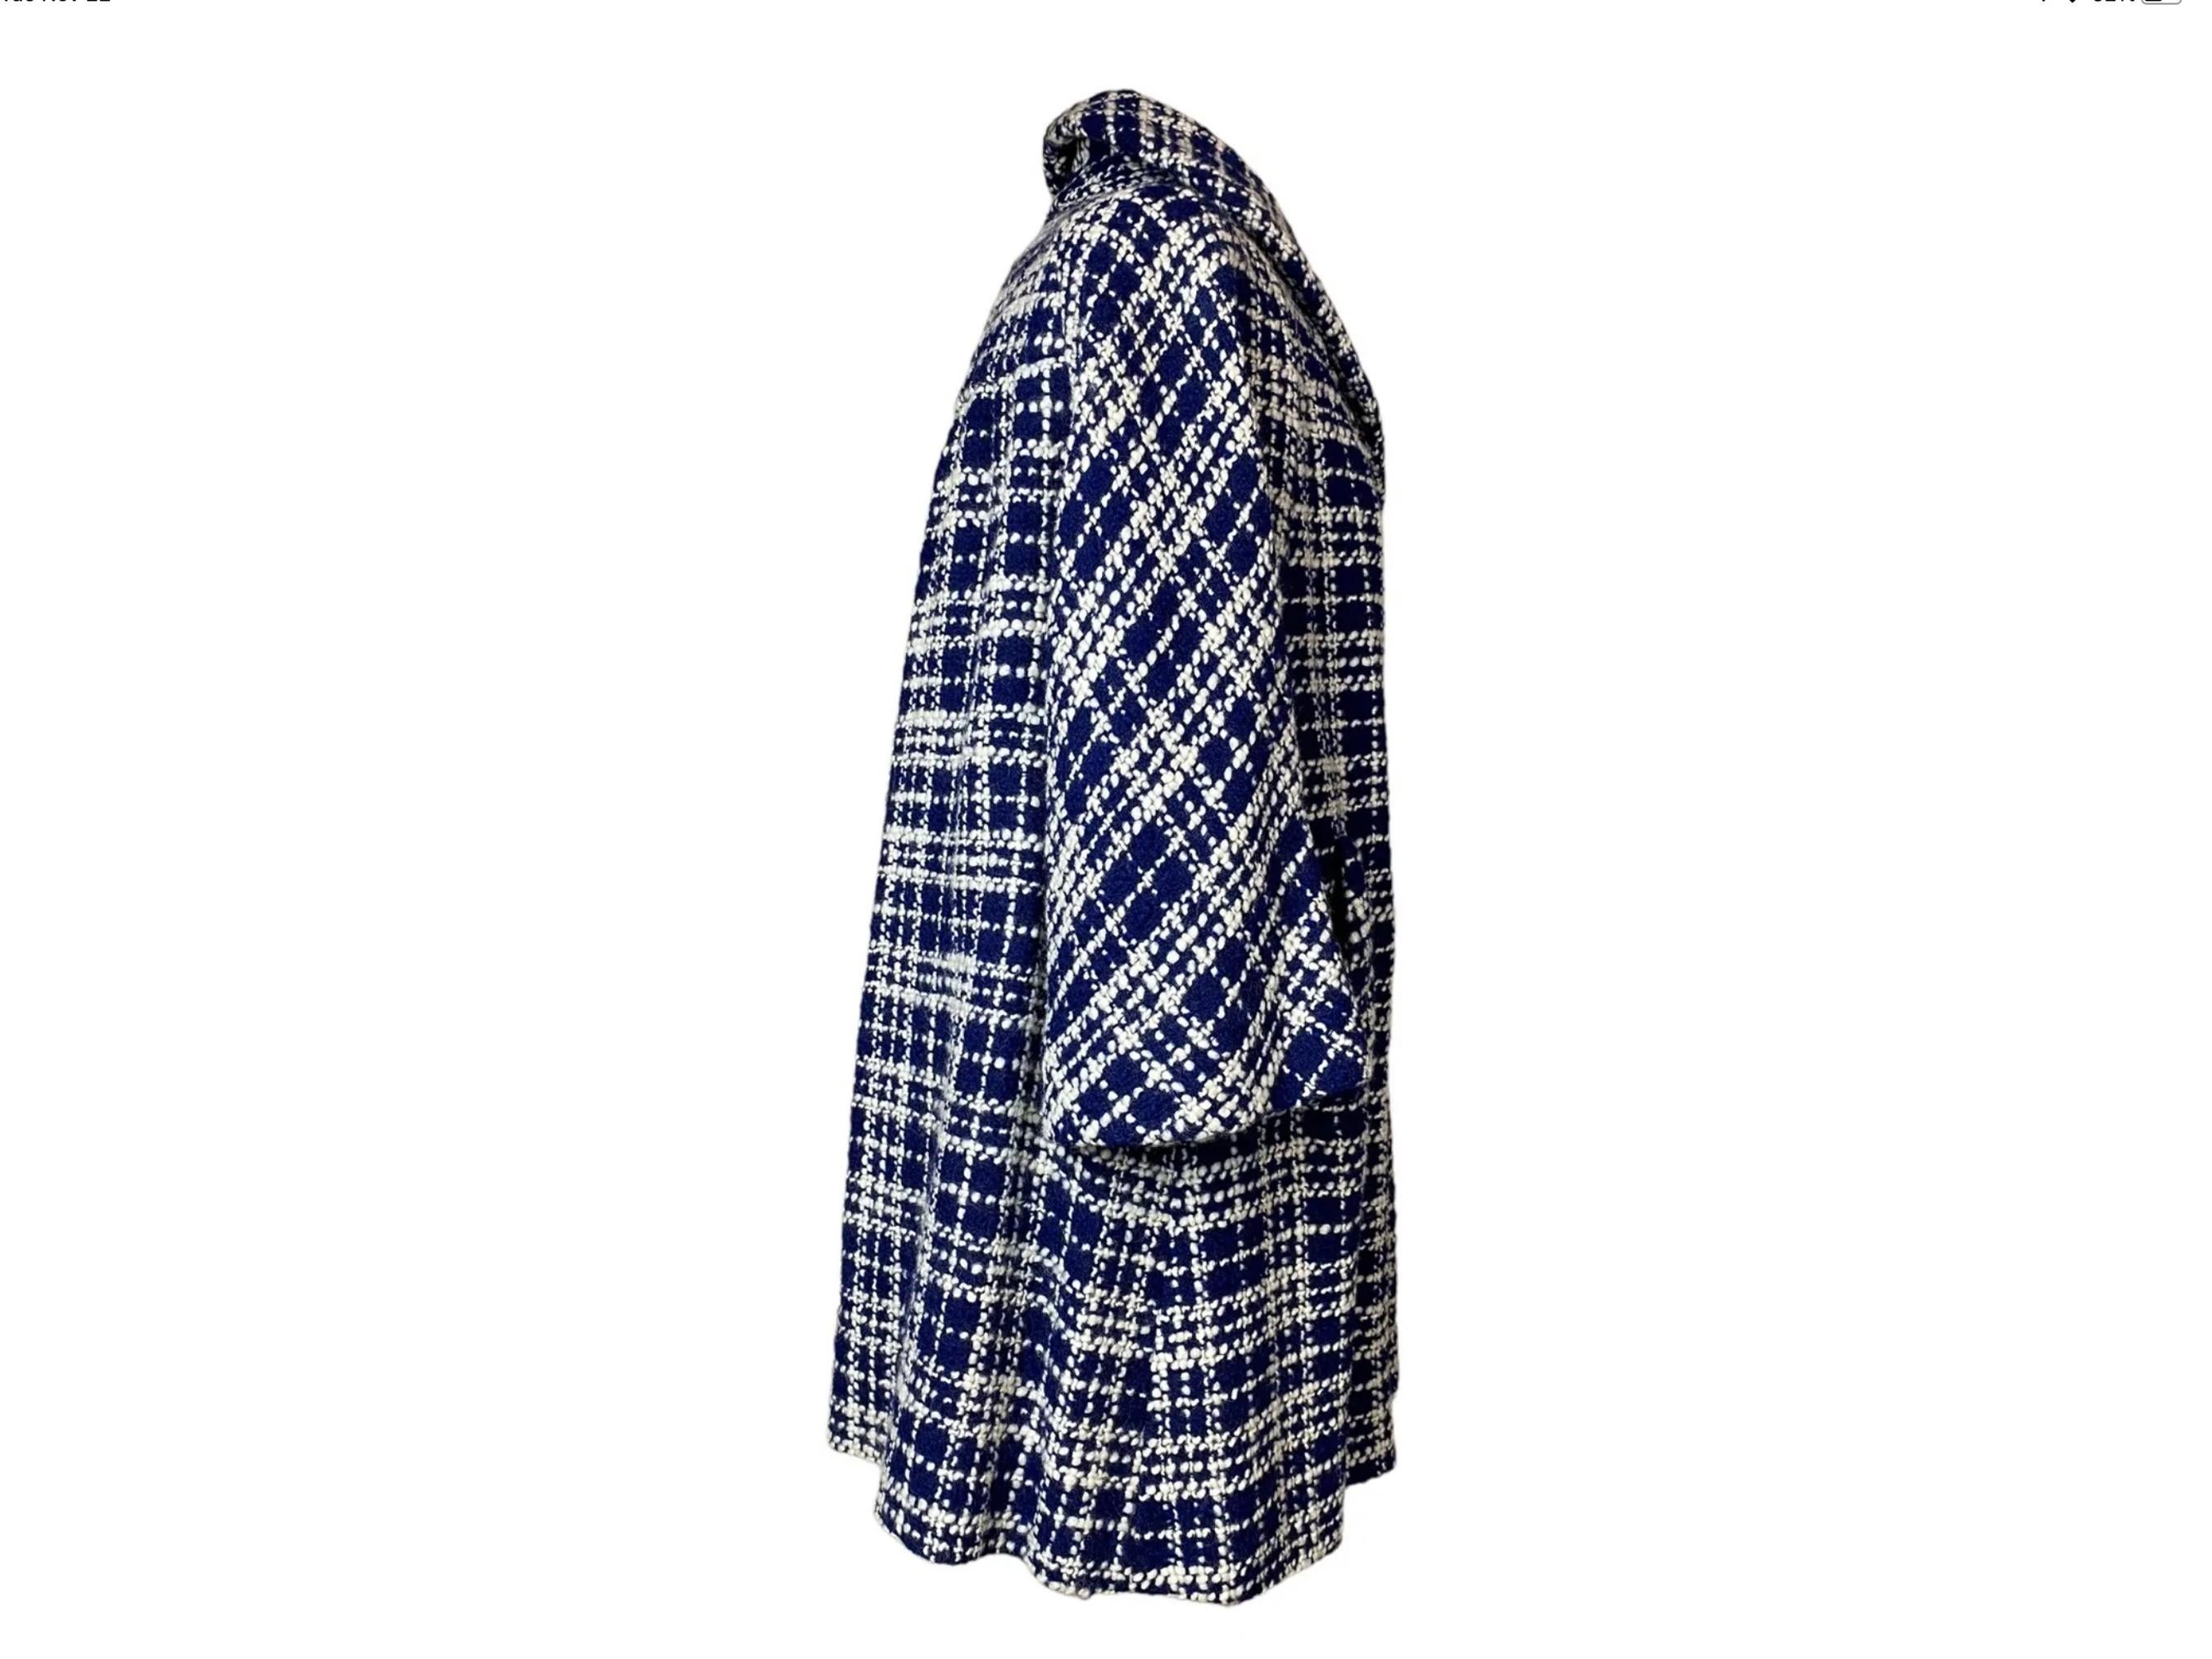 This is a fabulous, mid-weight wool coat from the very collectible vintage design house, Lilli Ann. The design is a timeless swing coat silhouette in a classic blue and white plaid wool. The feminine shawl collar softly frames the face. The